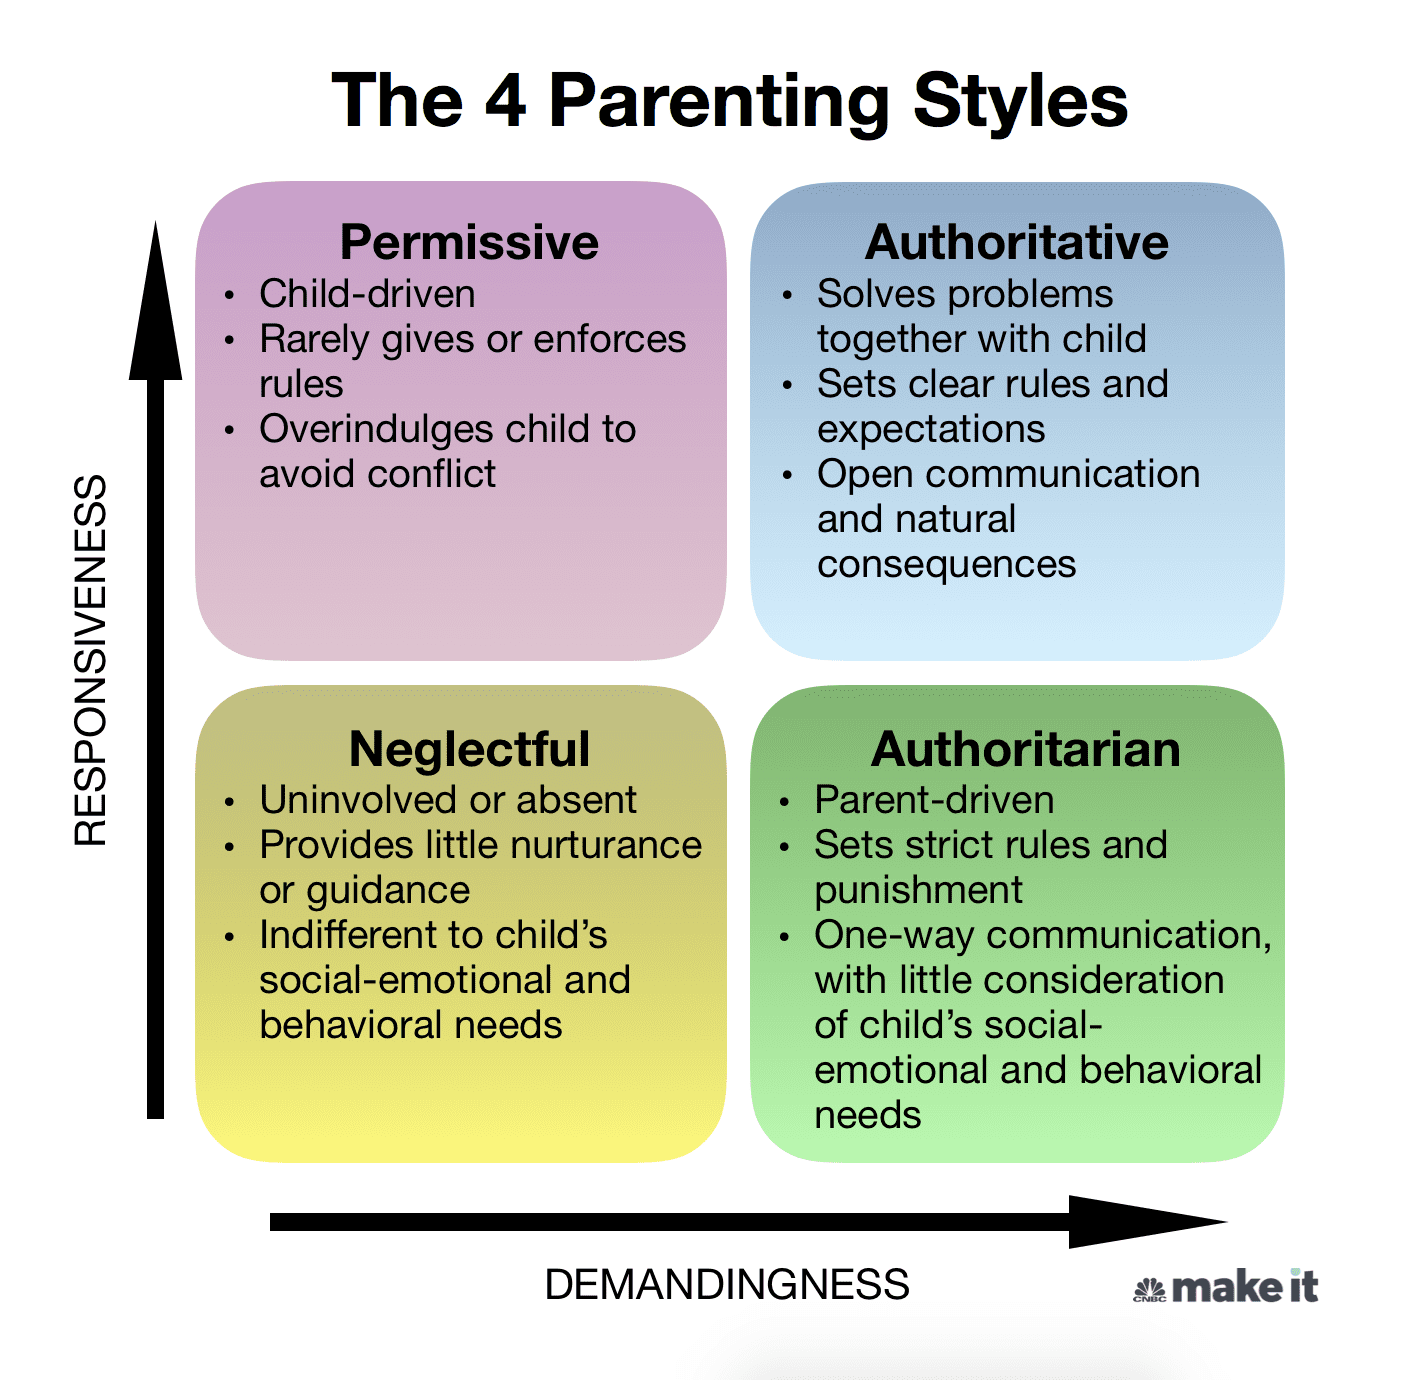 research questions on parenting styles